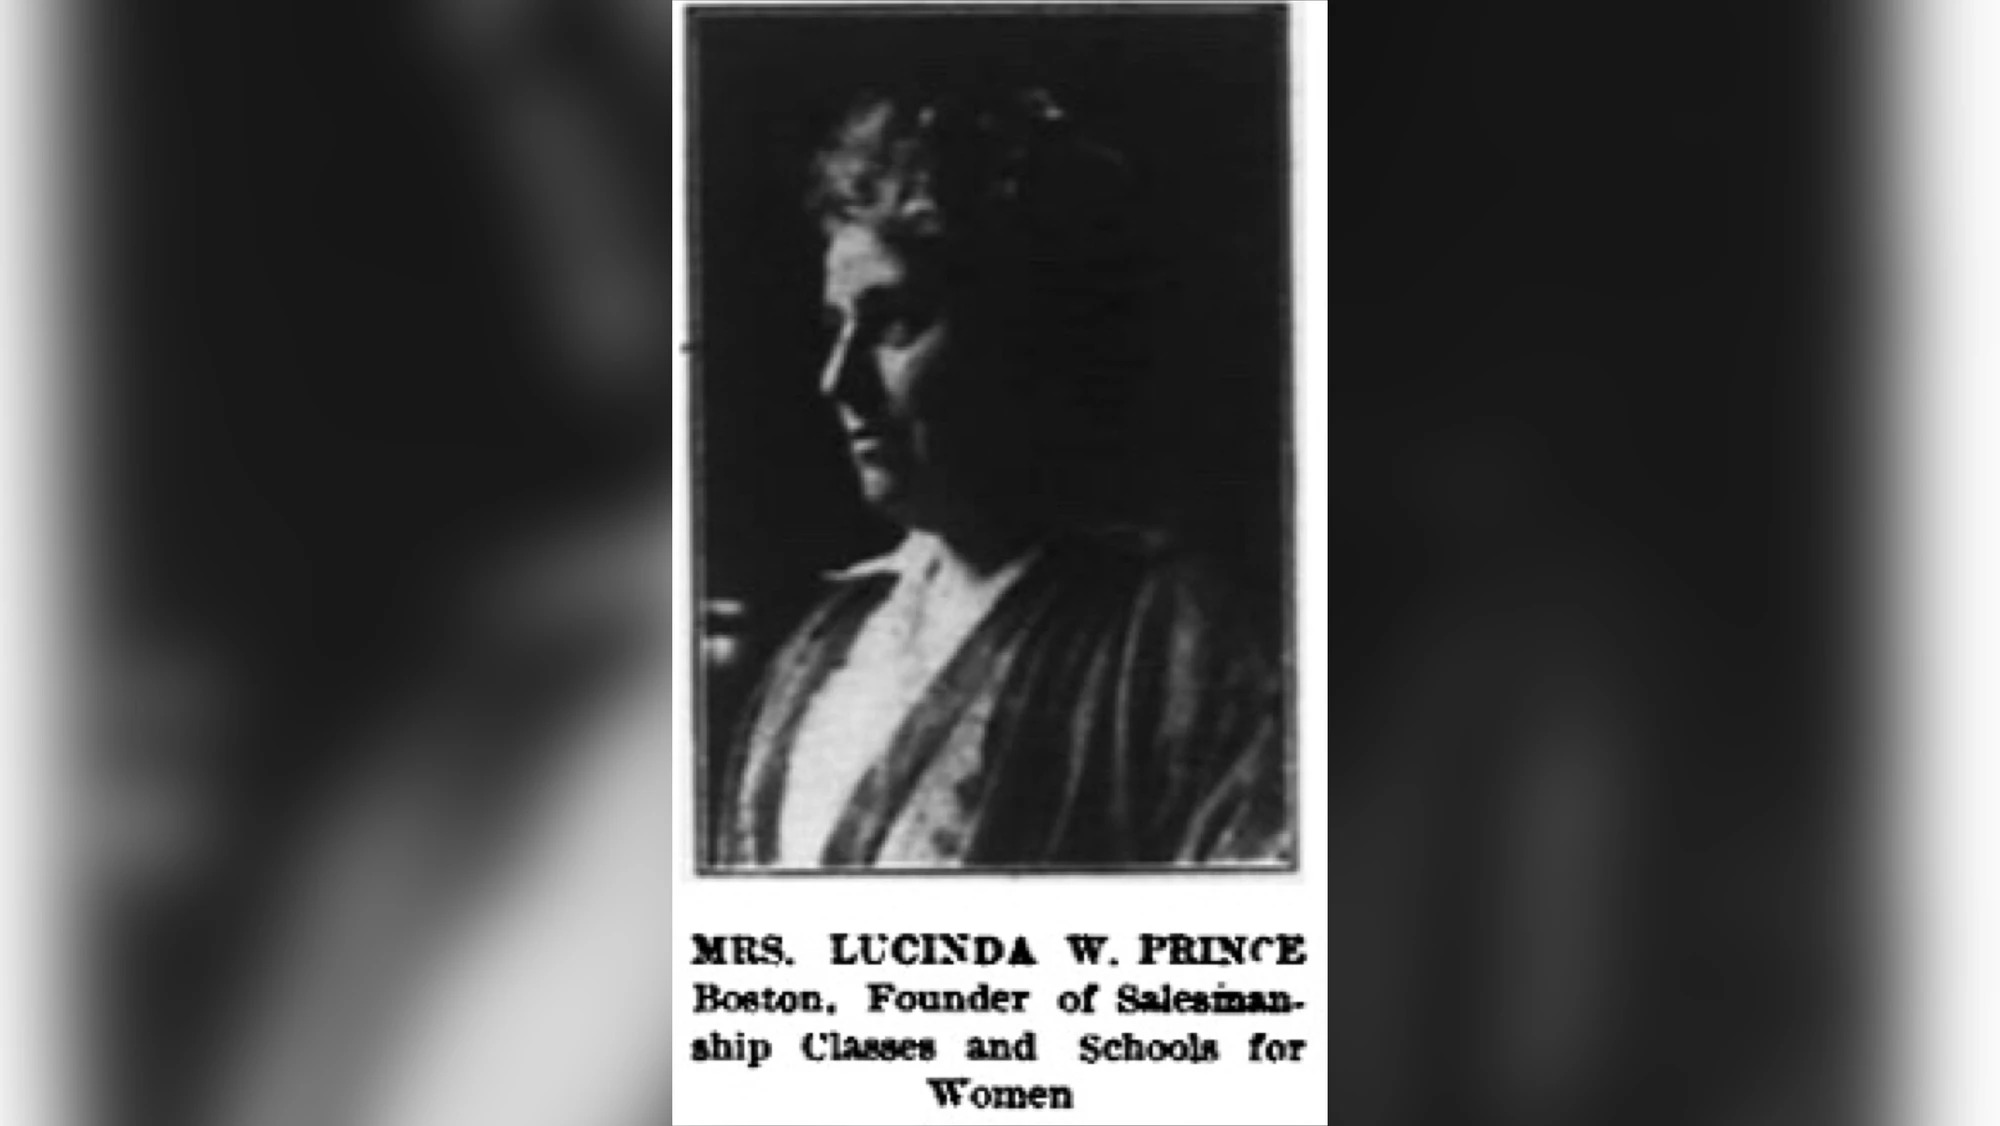 Lucinda W. Prince - THE Pioneer for Women in Sales